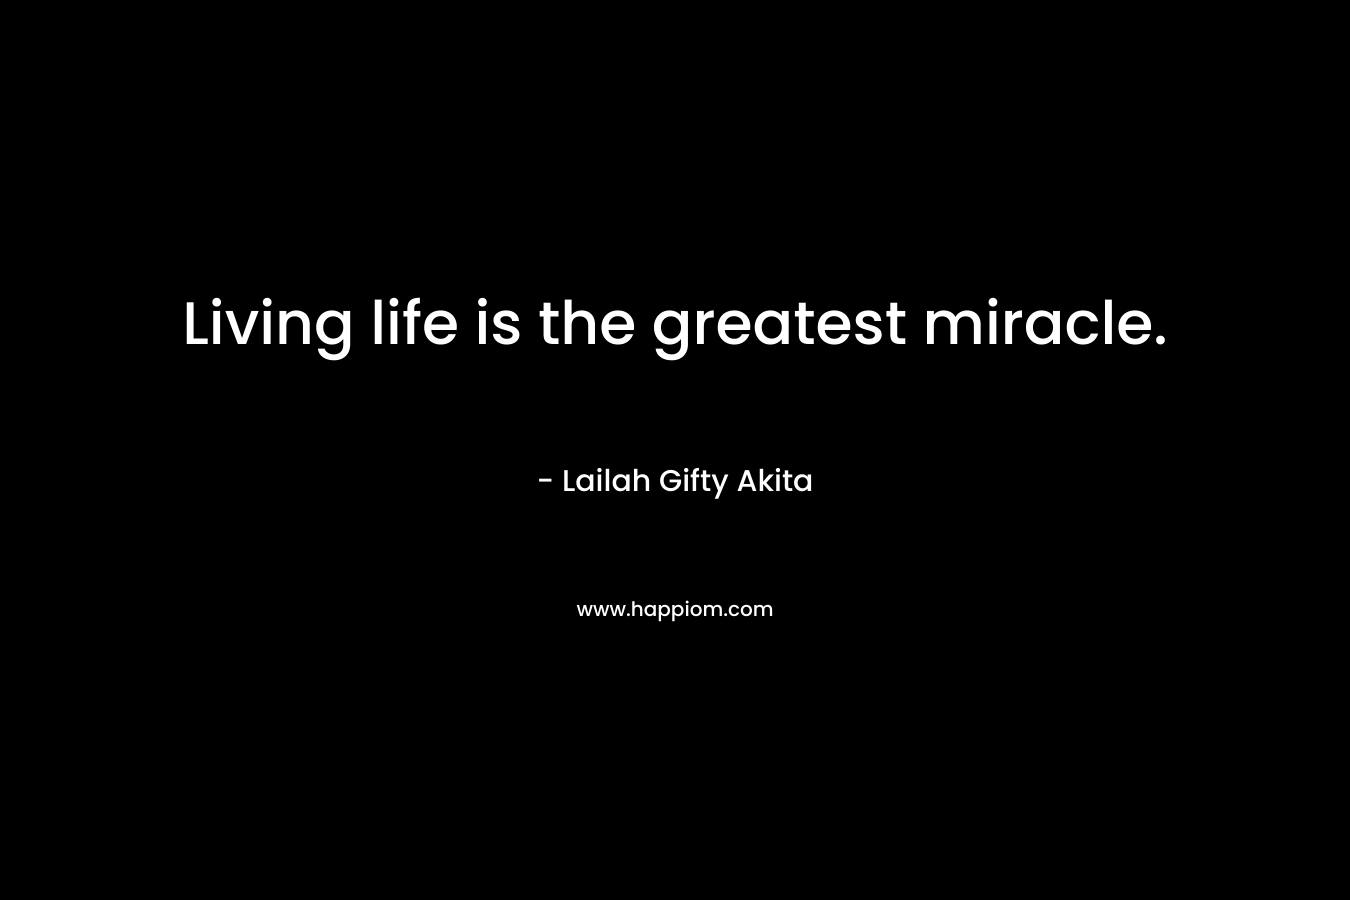 Living life is the greatest miracle.